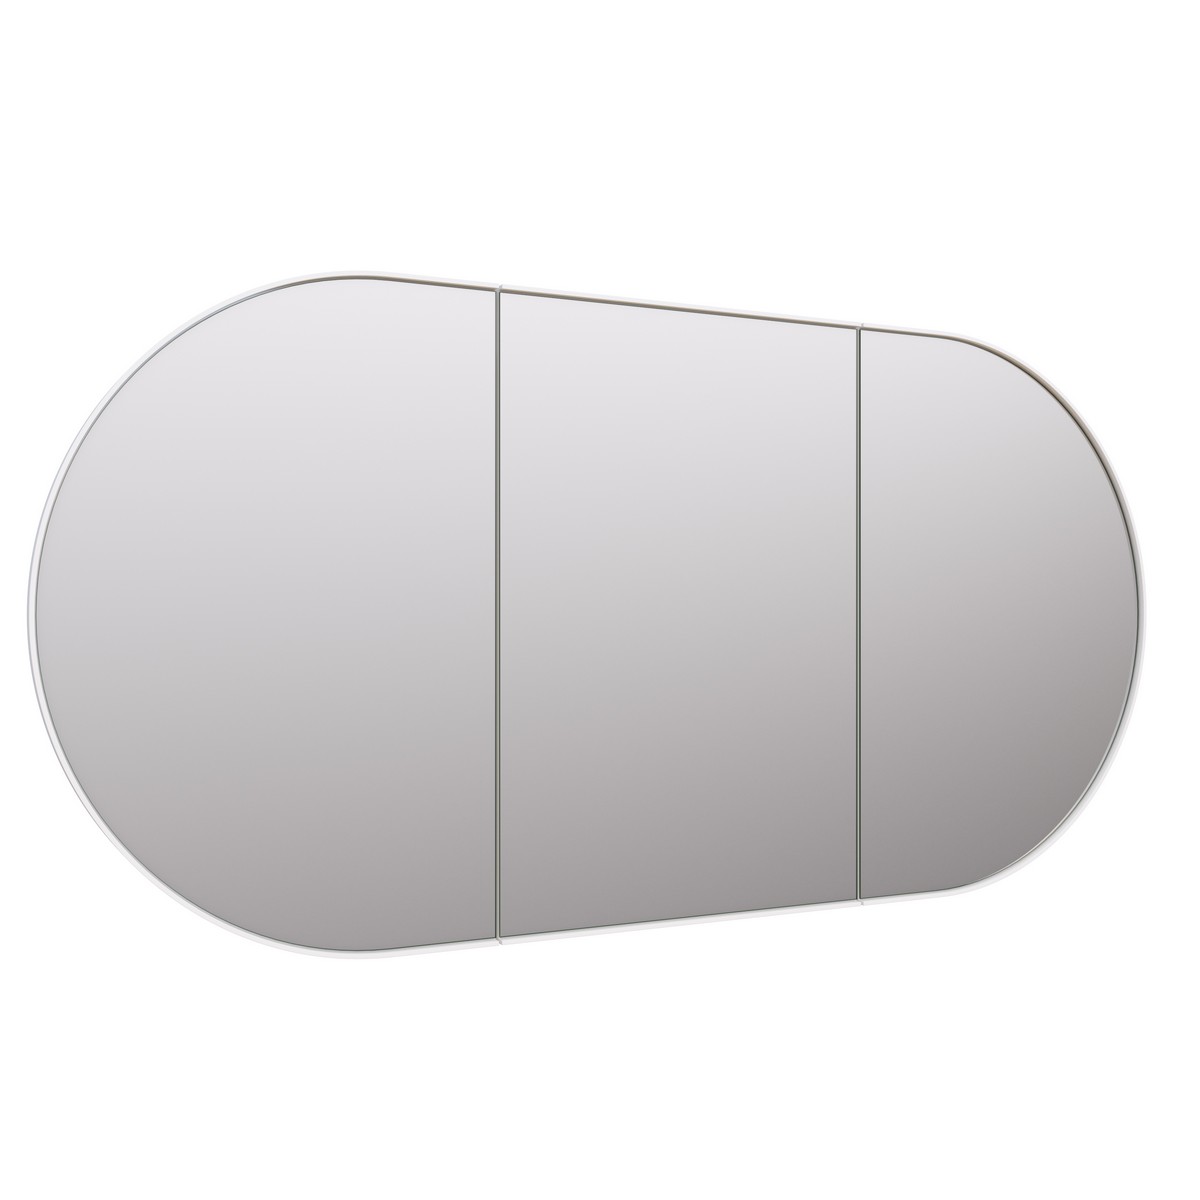 GLASS WAREHOUSE SC3-PL-60X30 NIA 60 INCH METAL OVAL RECESSED MEDICINE CABINET